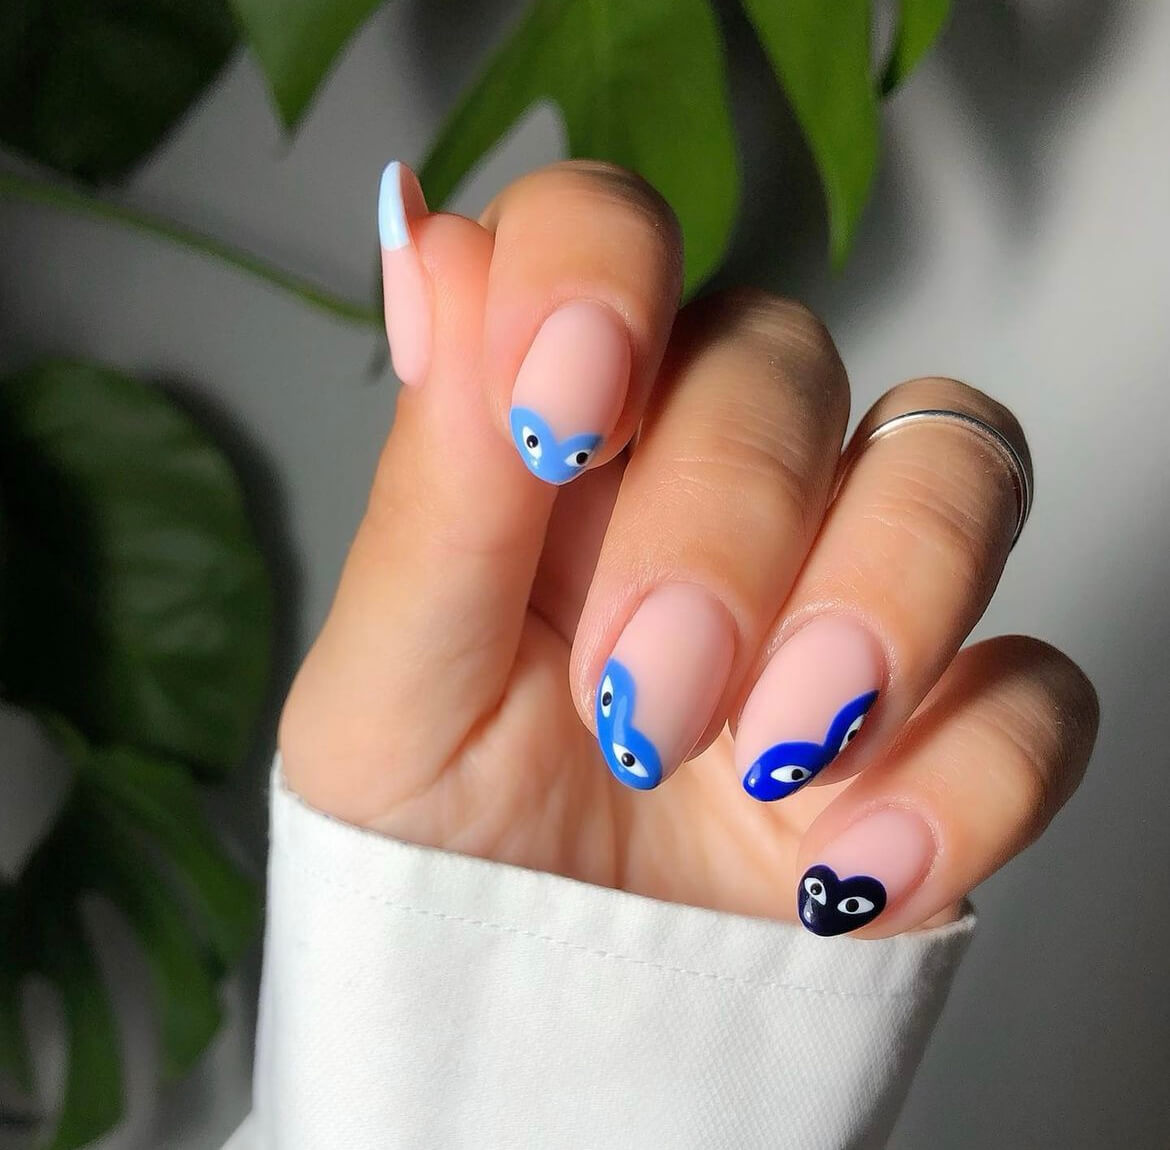 Blue and black eye nail art by Danielle Moore using Glossify